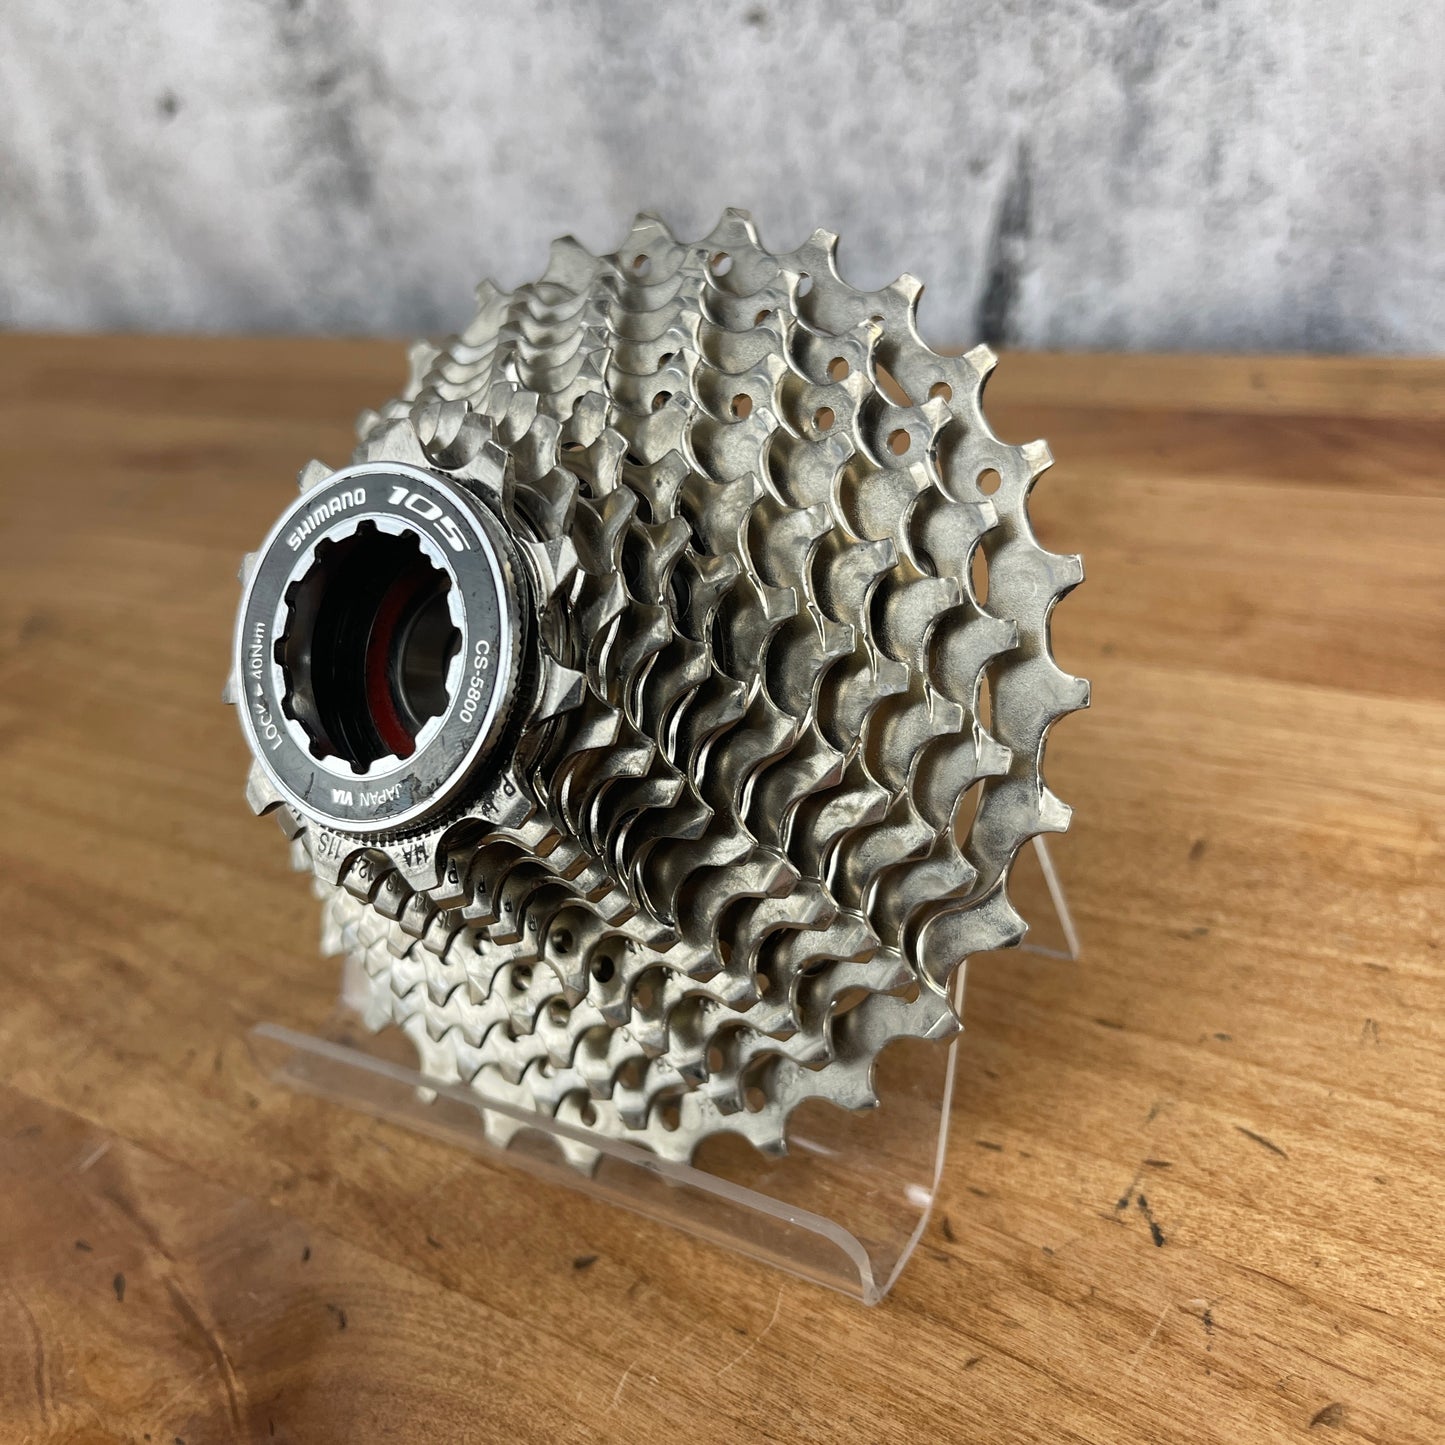 Shimano 105 CS-5800 11-28t 11-Speed Bicycle Cassette "Typical Wear" 276g